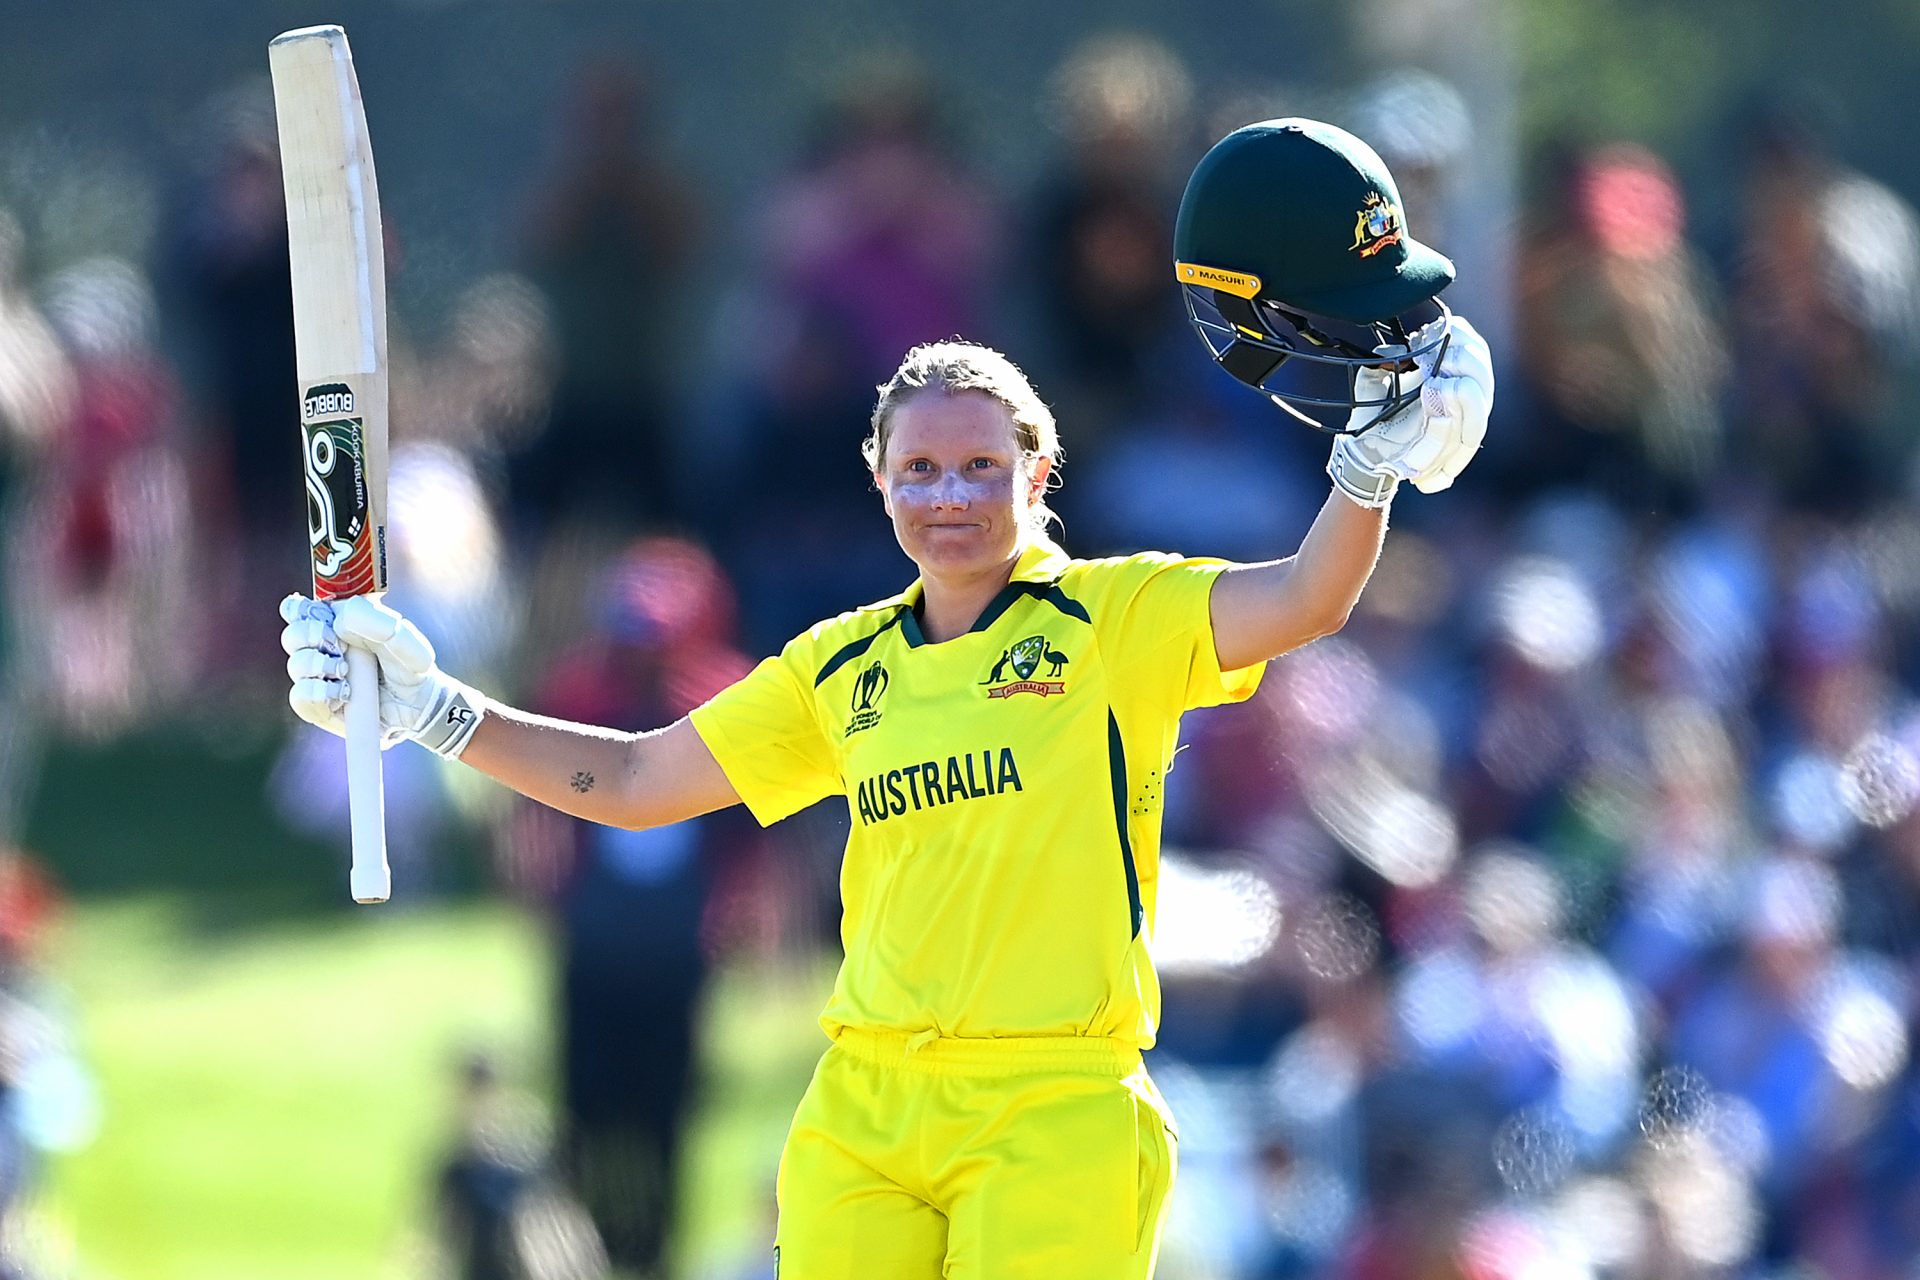 Alyssa Healy sidelined after “gory” dog bite incident